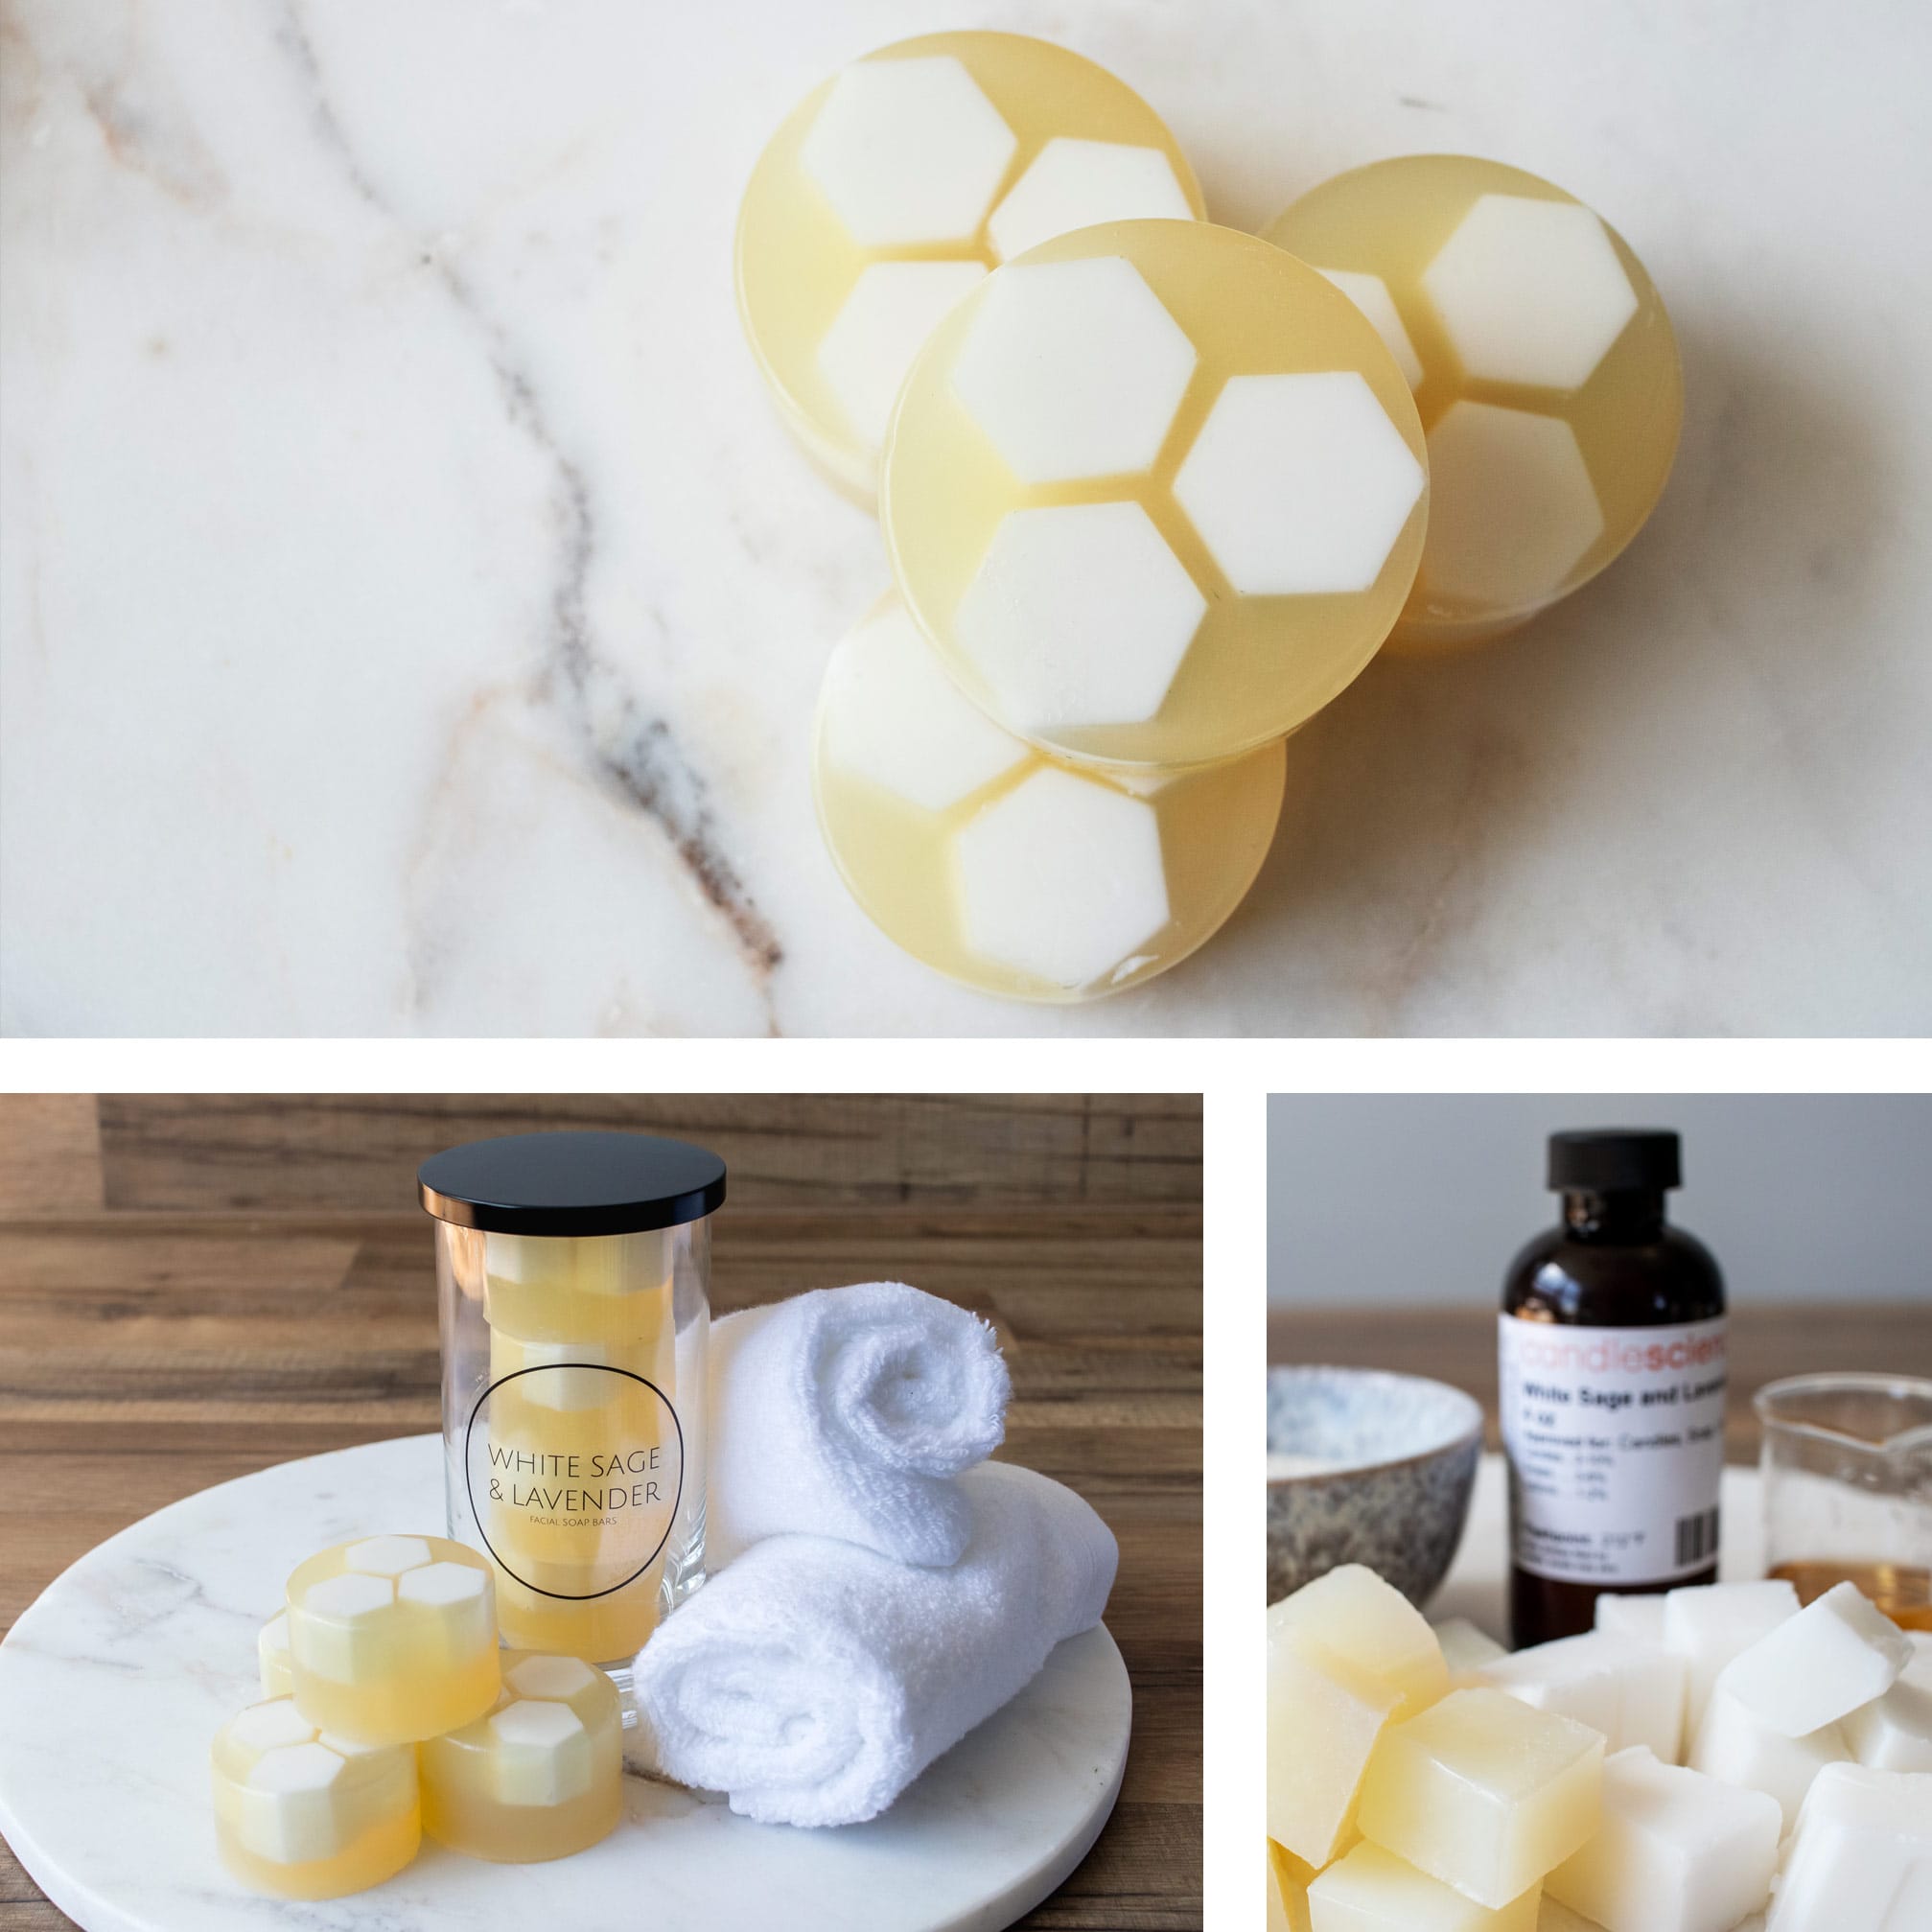 Handmade honeycomb facial soap from melt and pour soap